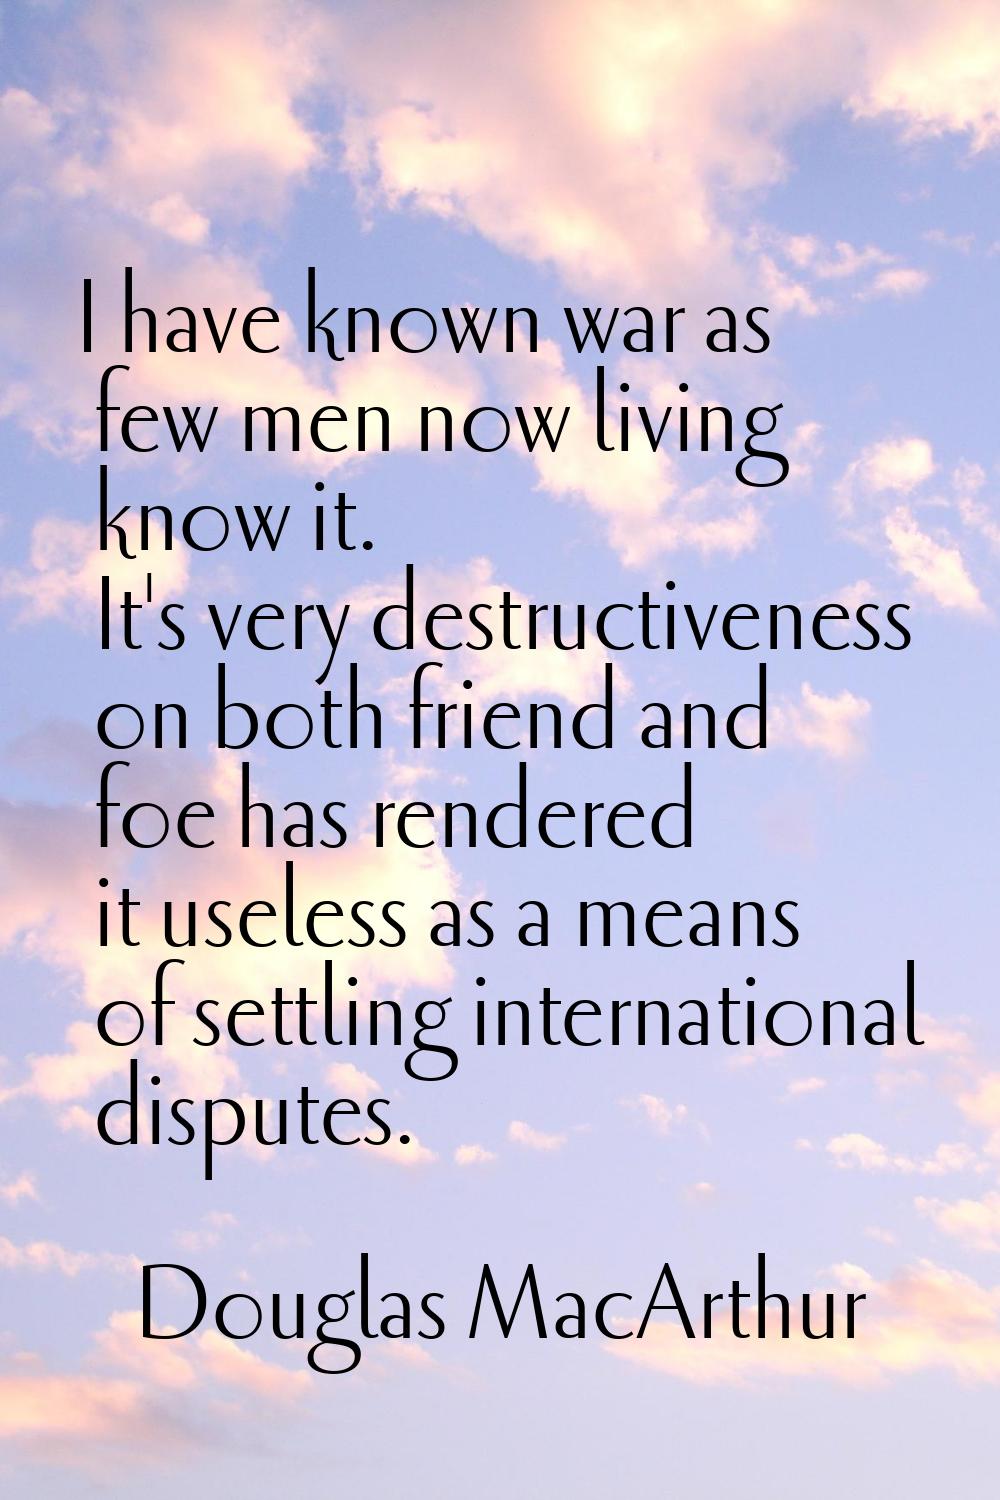 I have known war as few men now living know it. It's very destructiveness on both friend and foe ha